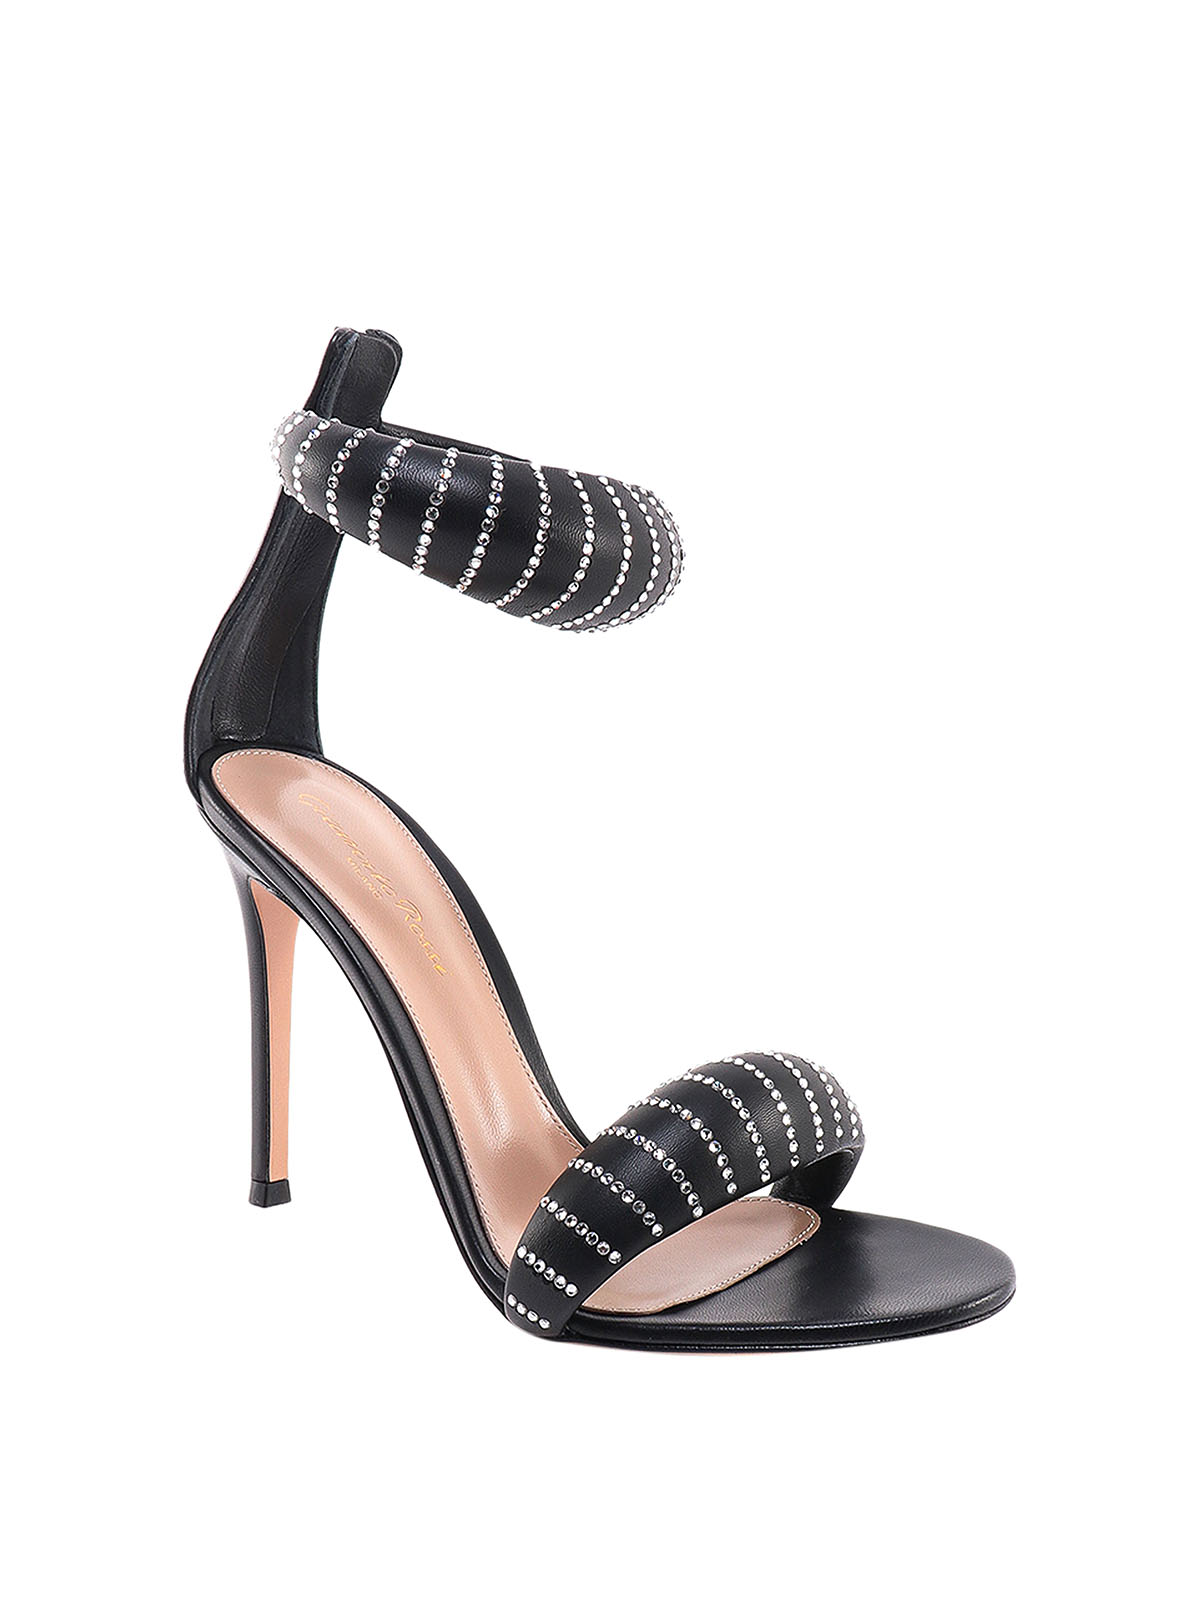 Shop Gianvito Rossi Leather Sandals With Rhinestones In Black